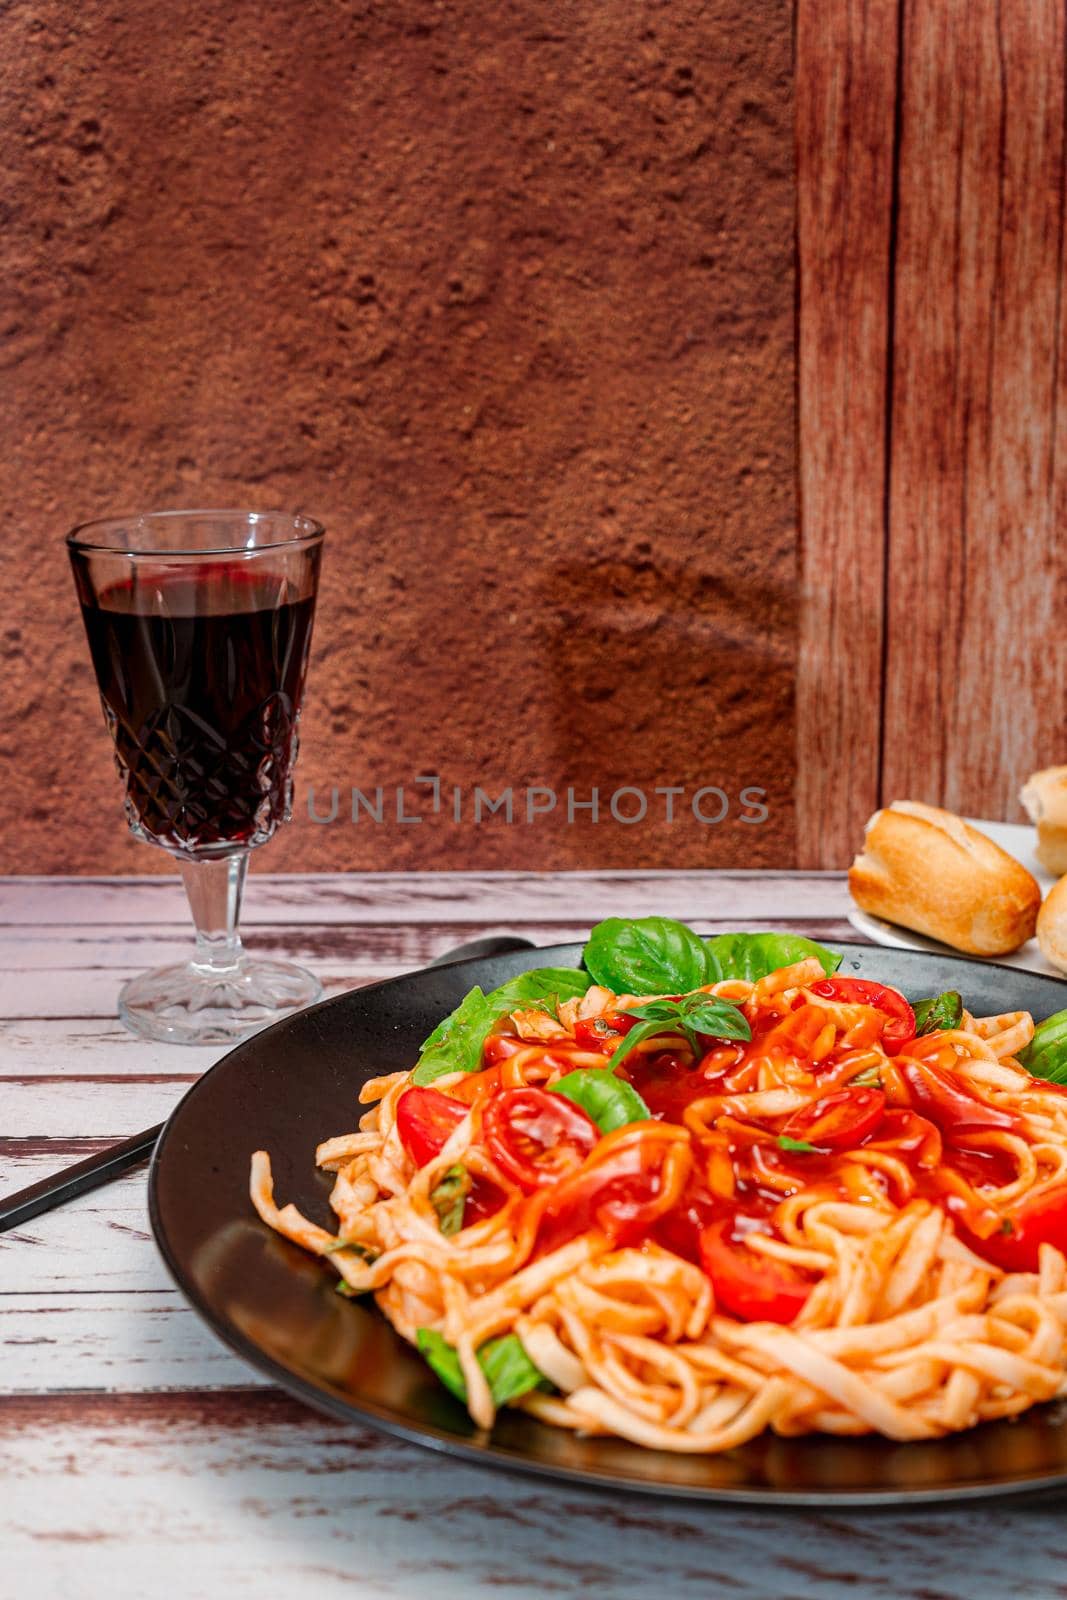 Spaghetti pasta with an exquisite homemade tomato sauce with homemade basil leaves served on a black plate with a glass of wine on a rustic table. Vertical orientation. Copy space.